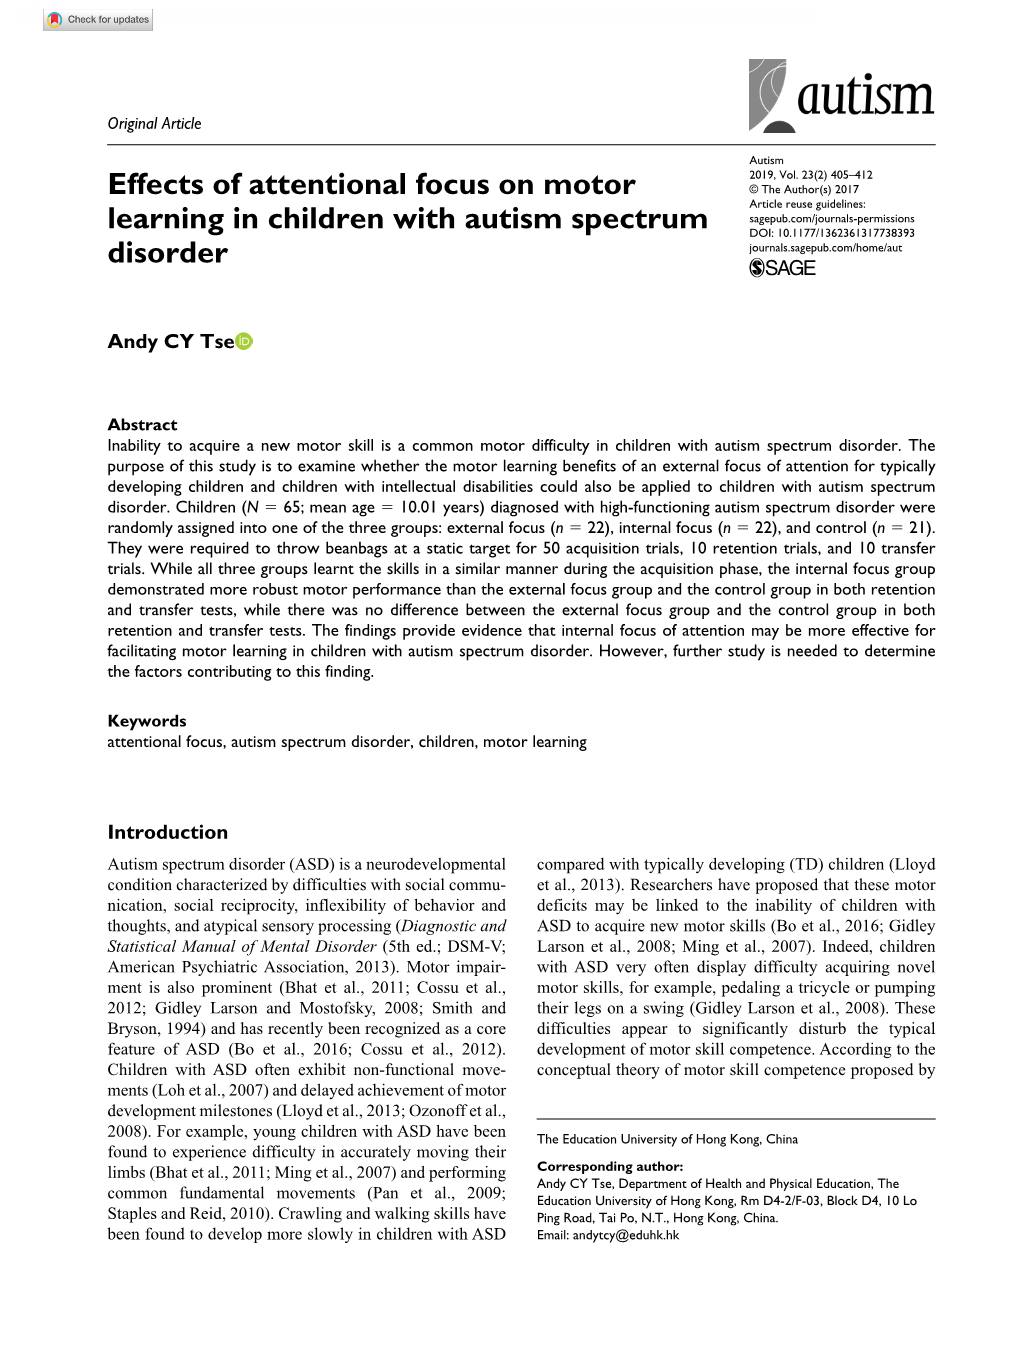 Effects of Attentional Focus on Motor Learning in Children with Autism